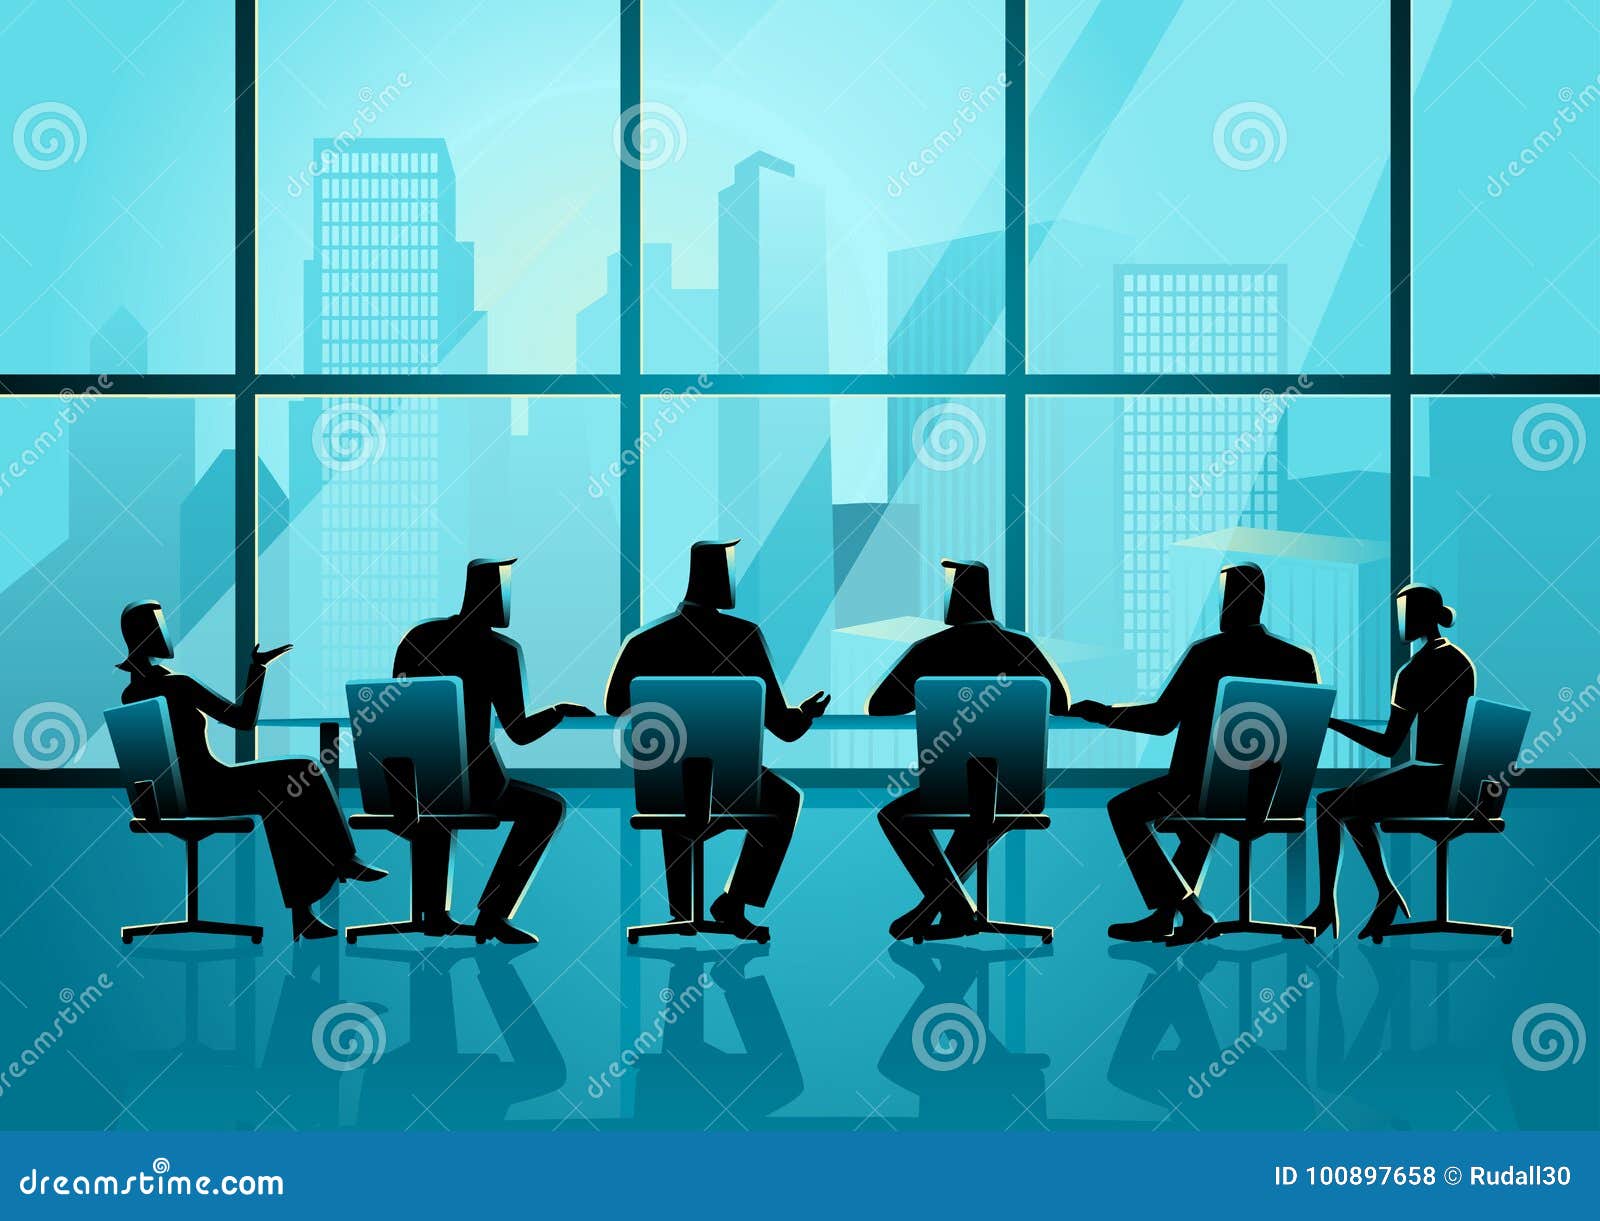 business people having a meeting in executive conference room